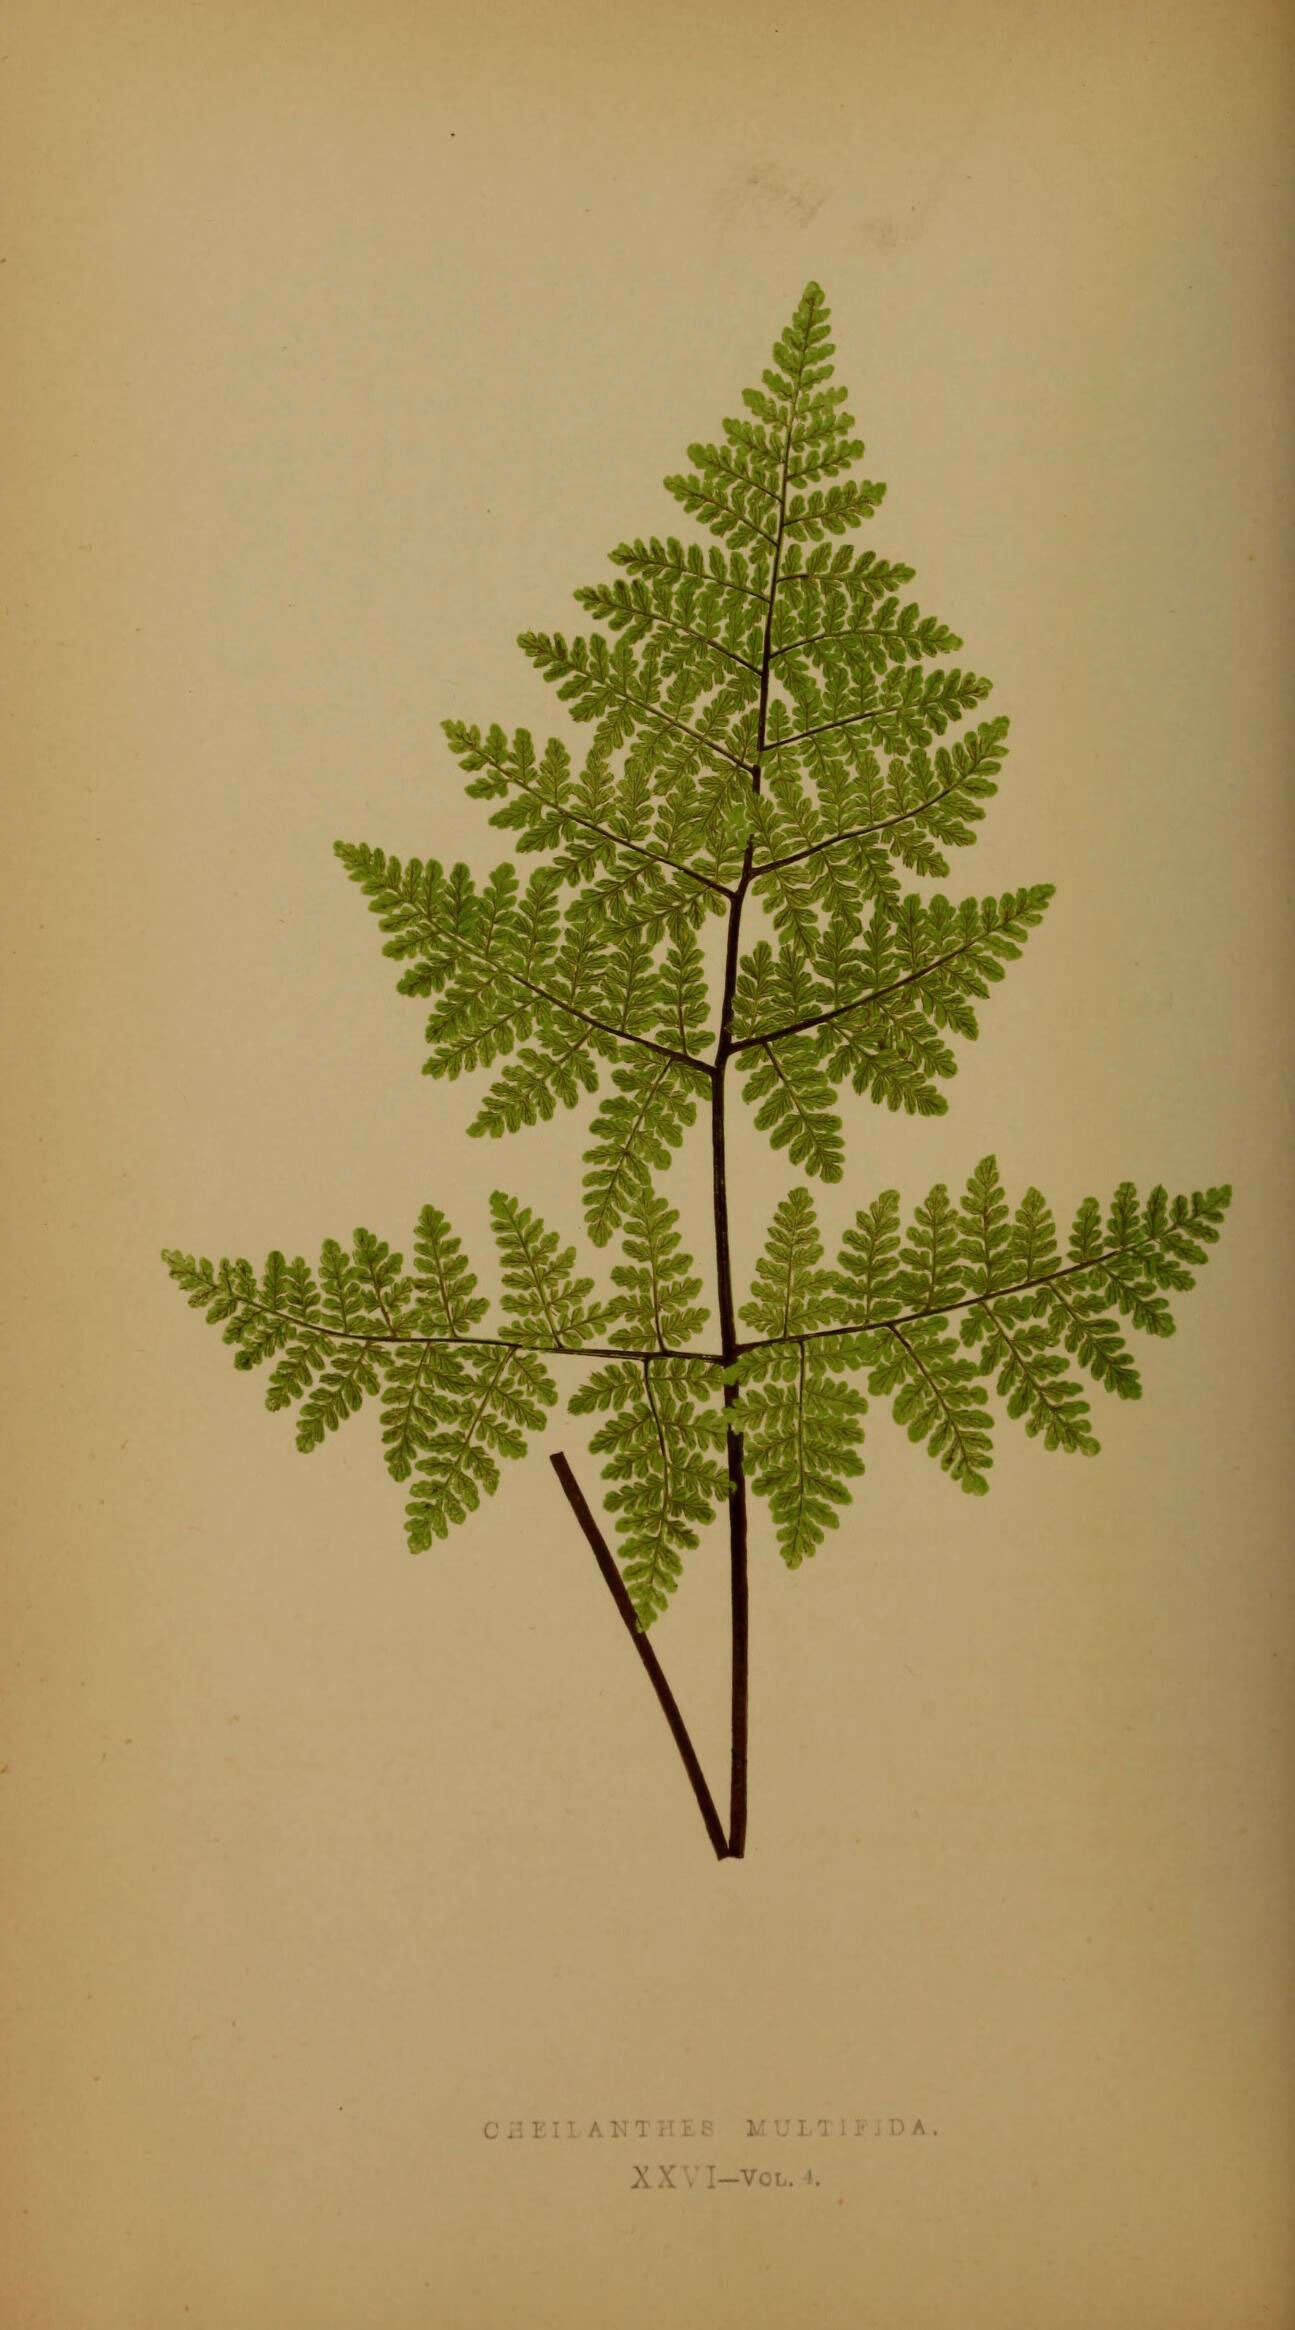 Image of Cheilanthes multifida (Sw.) Sw.